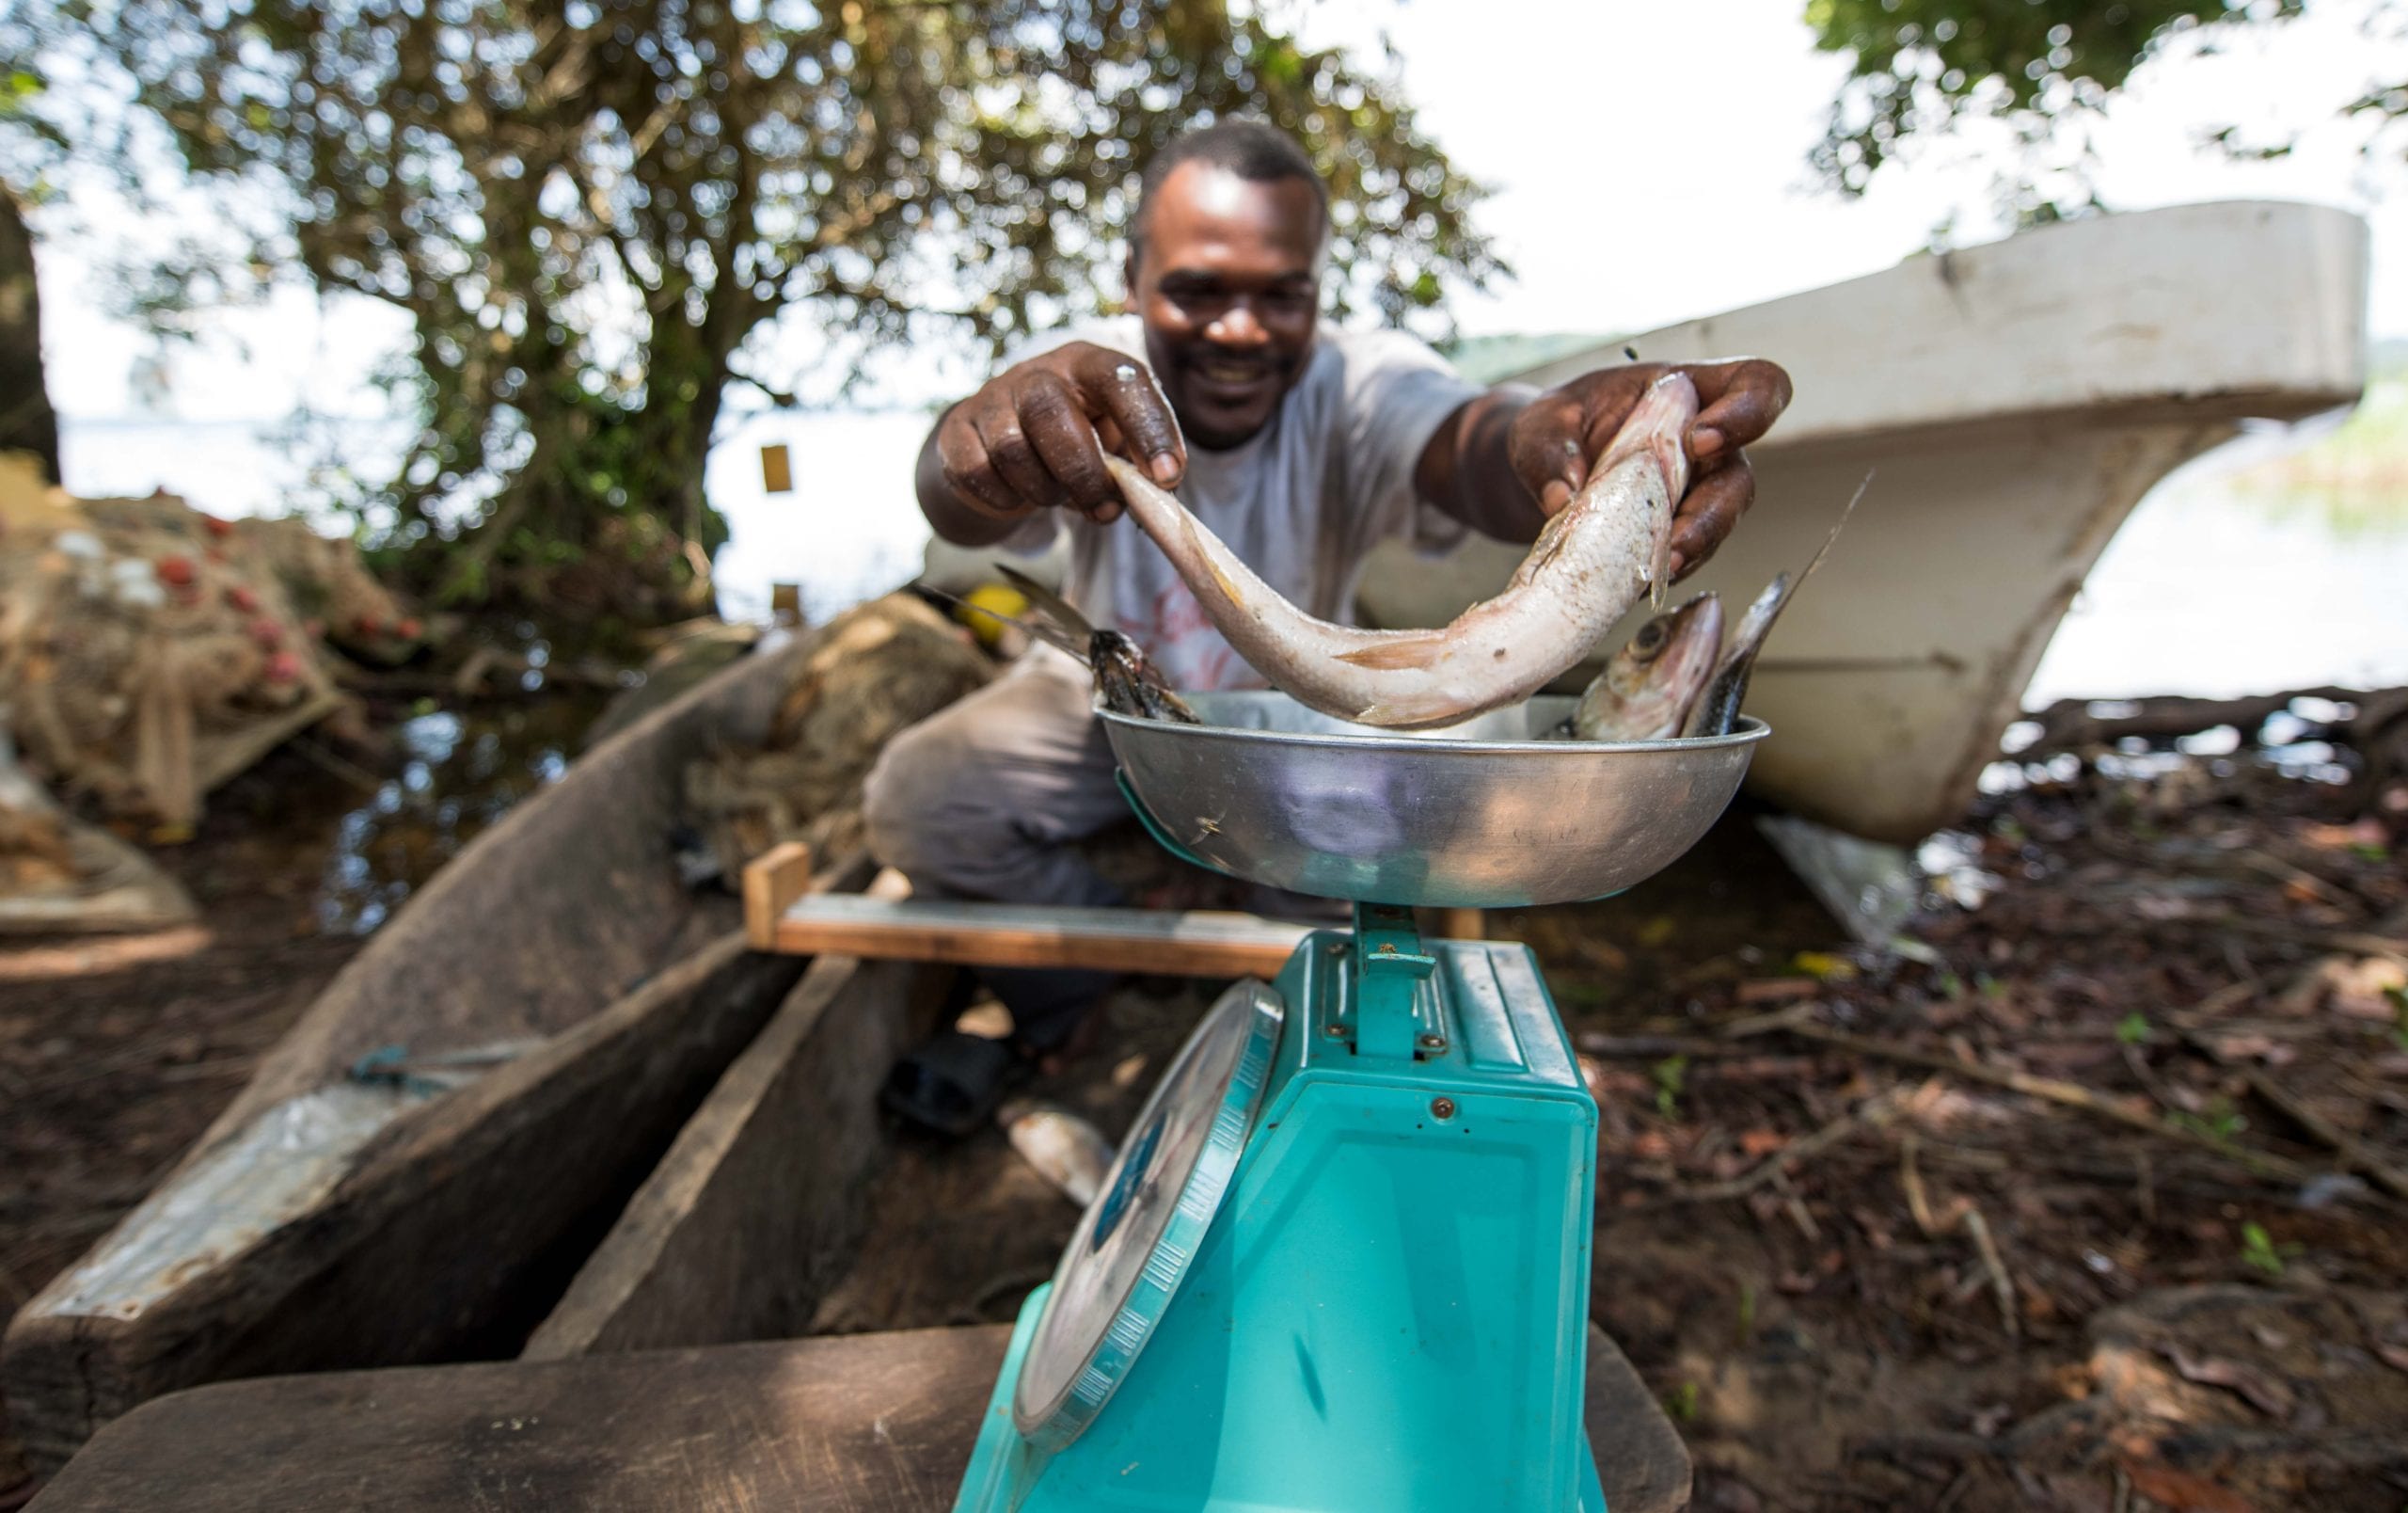 Martial Angoue, member of Sustainable Fishing Coop Amven, collects data on fish catch (photo credit Roshni Lodhia)